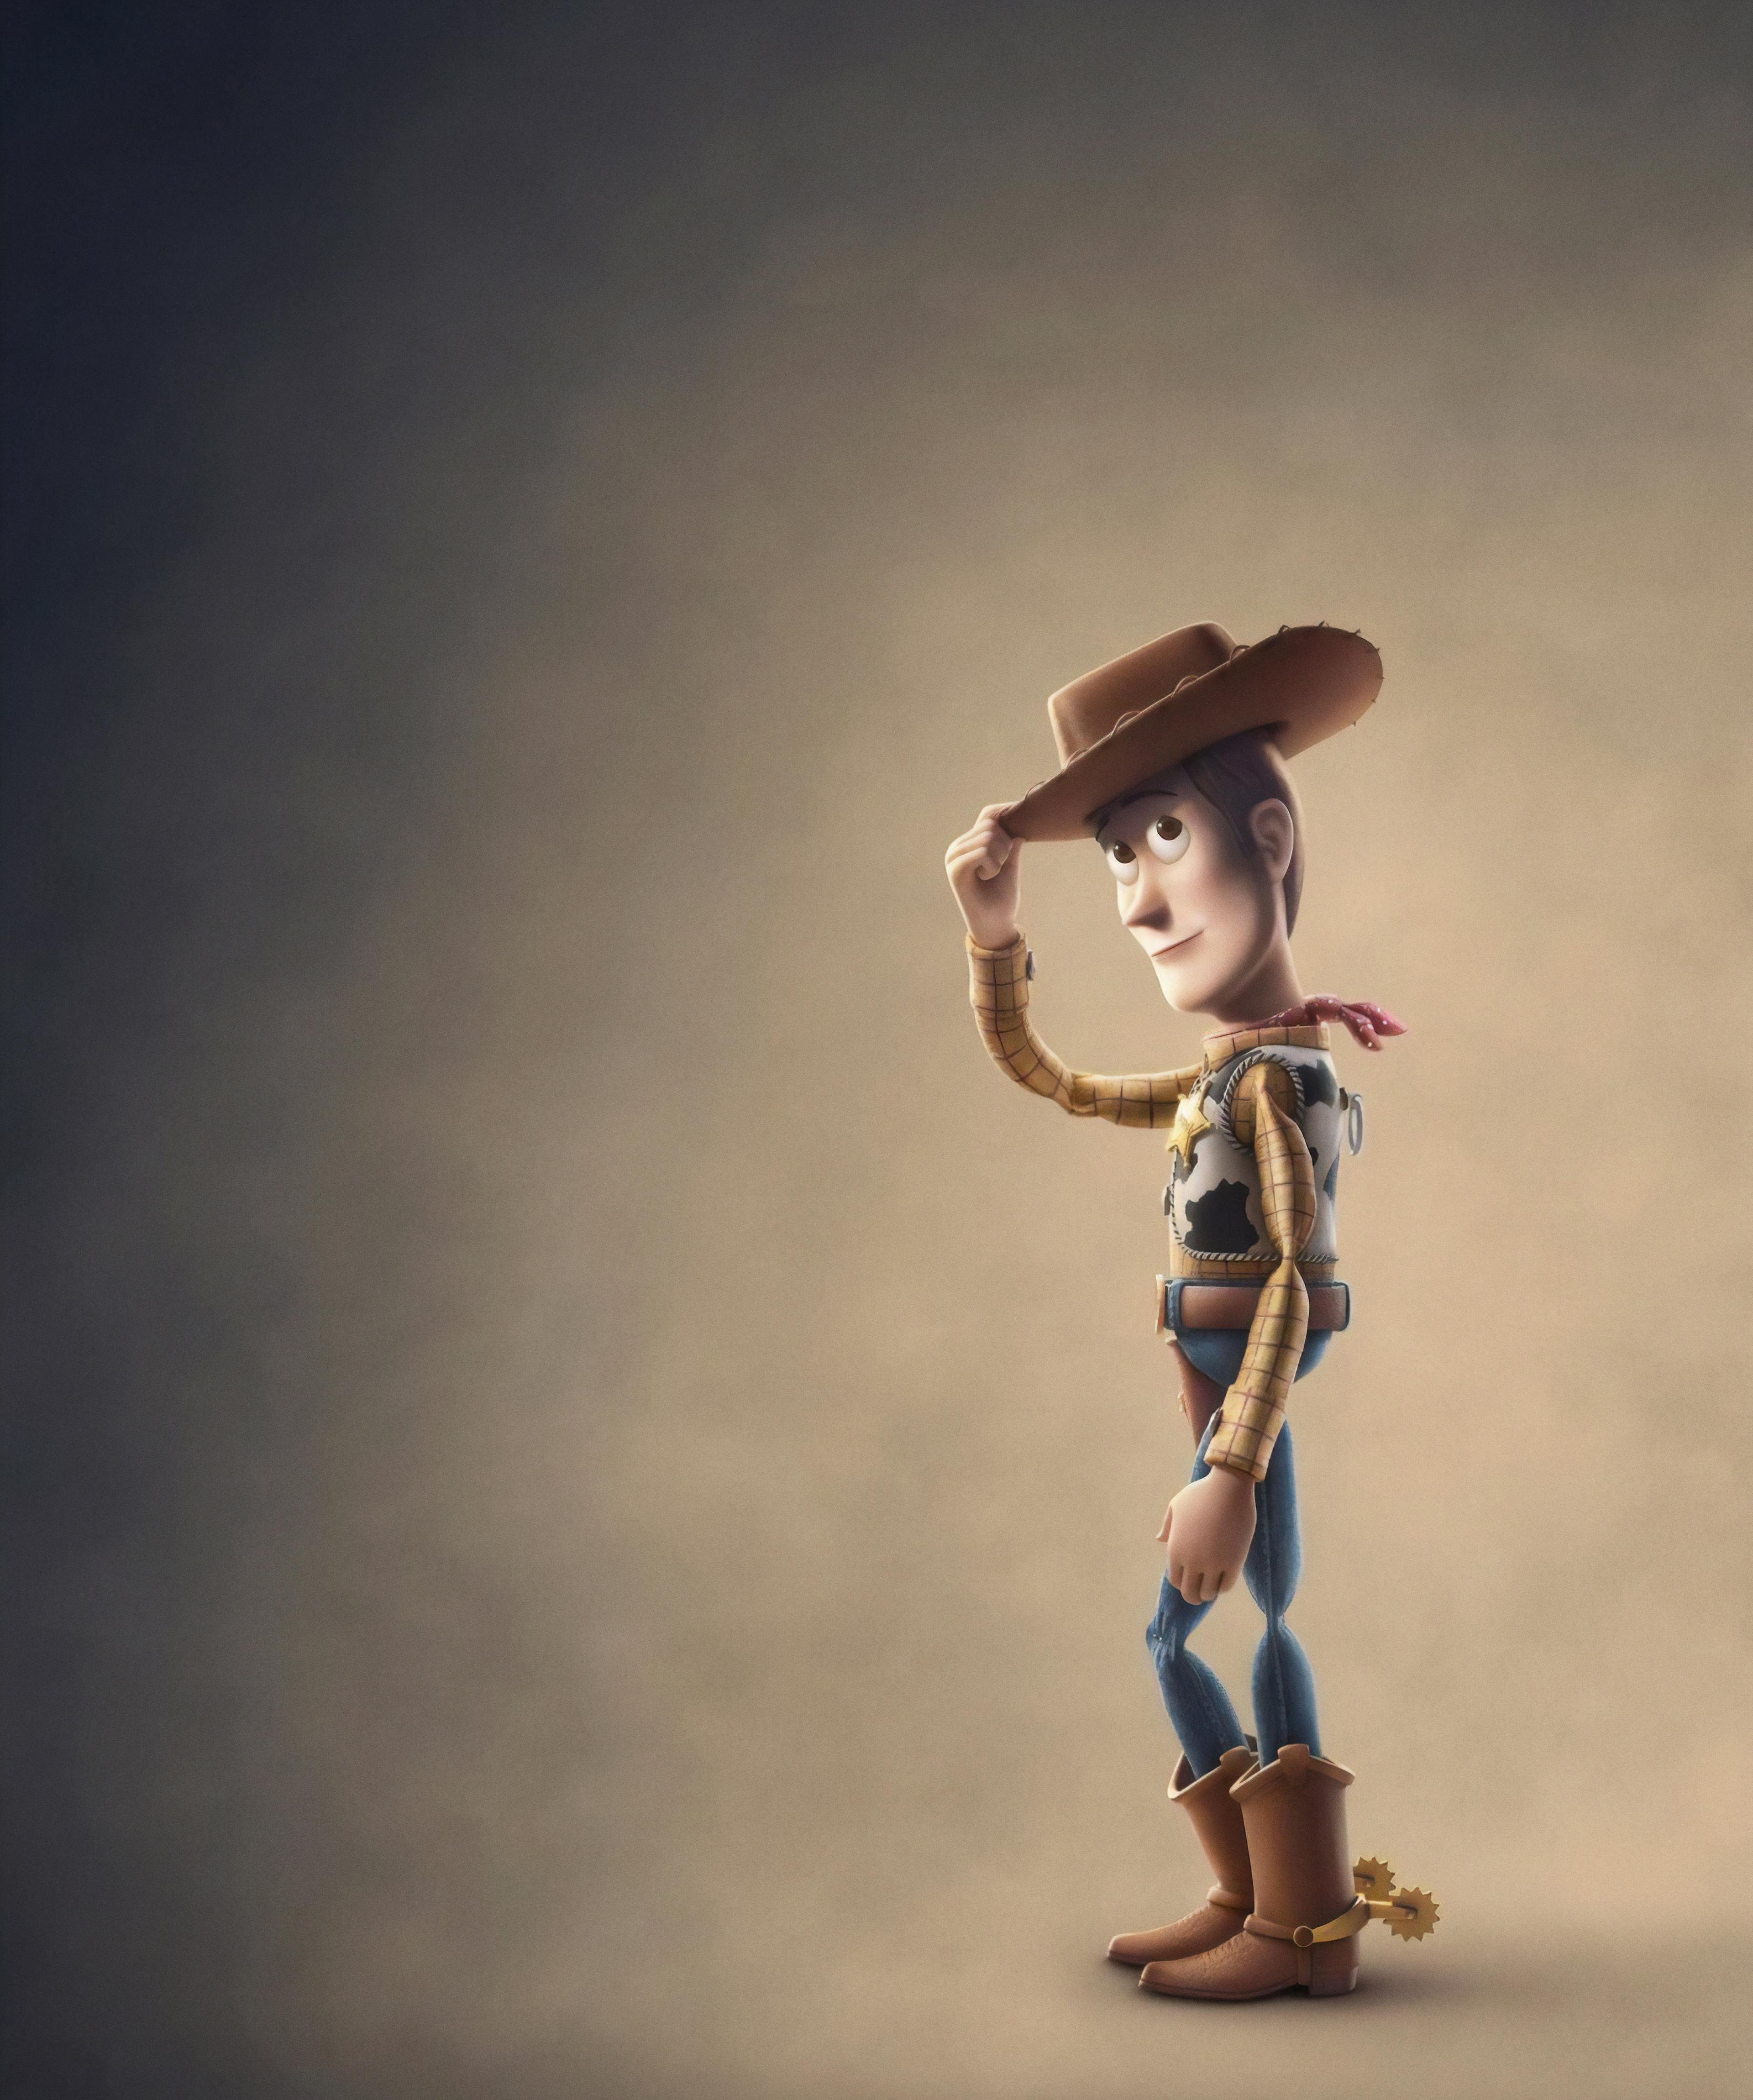 Wallpaper Toy Story Woody, Animation, Pixar, 4K, Movies